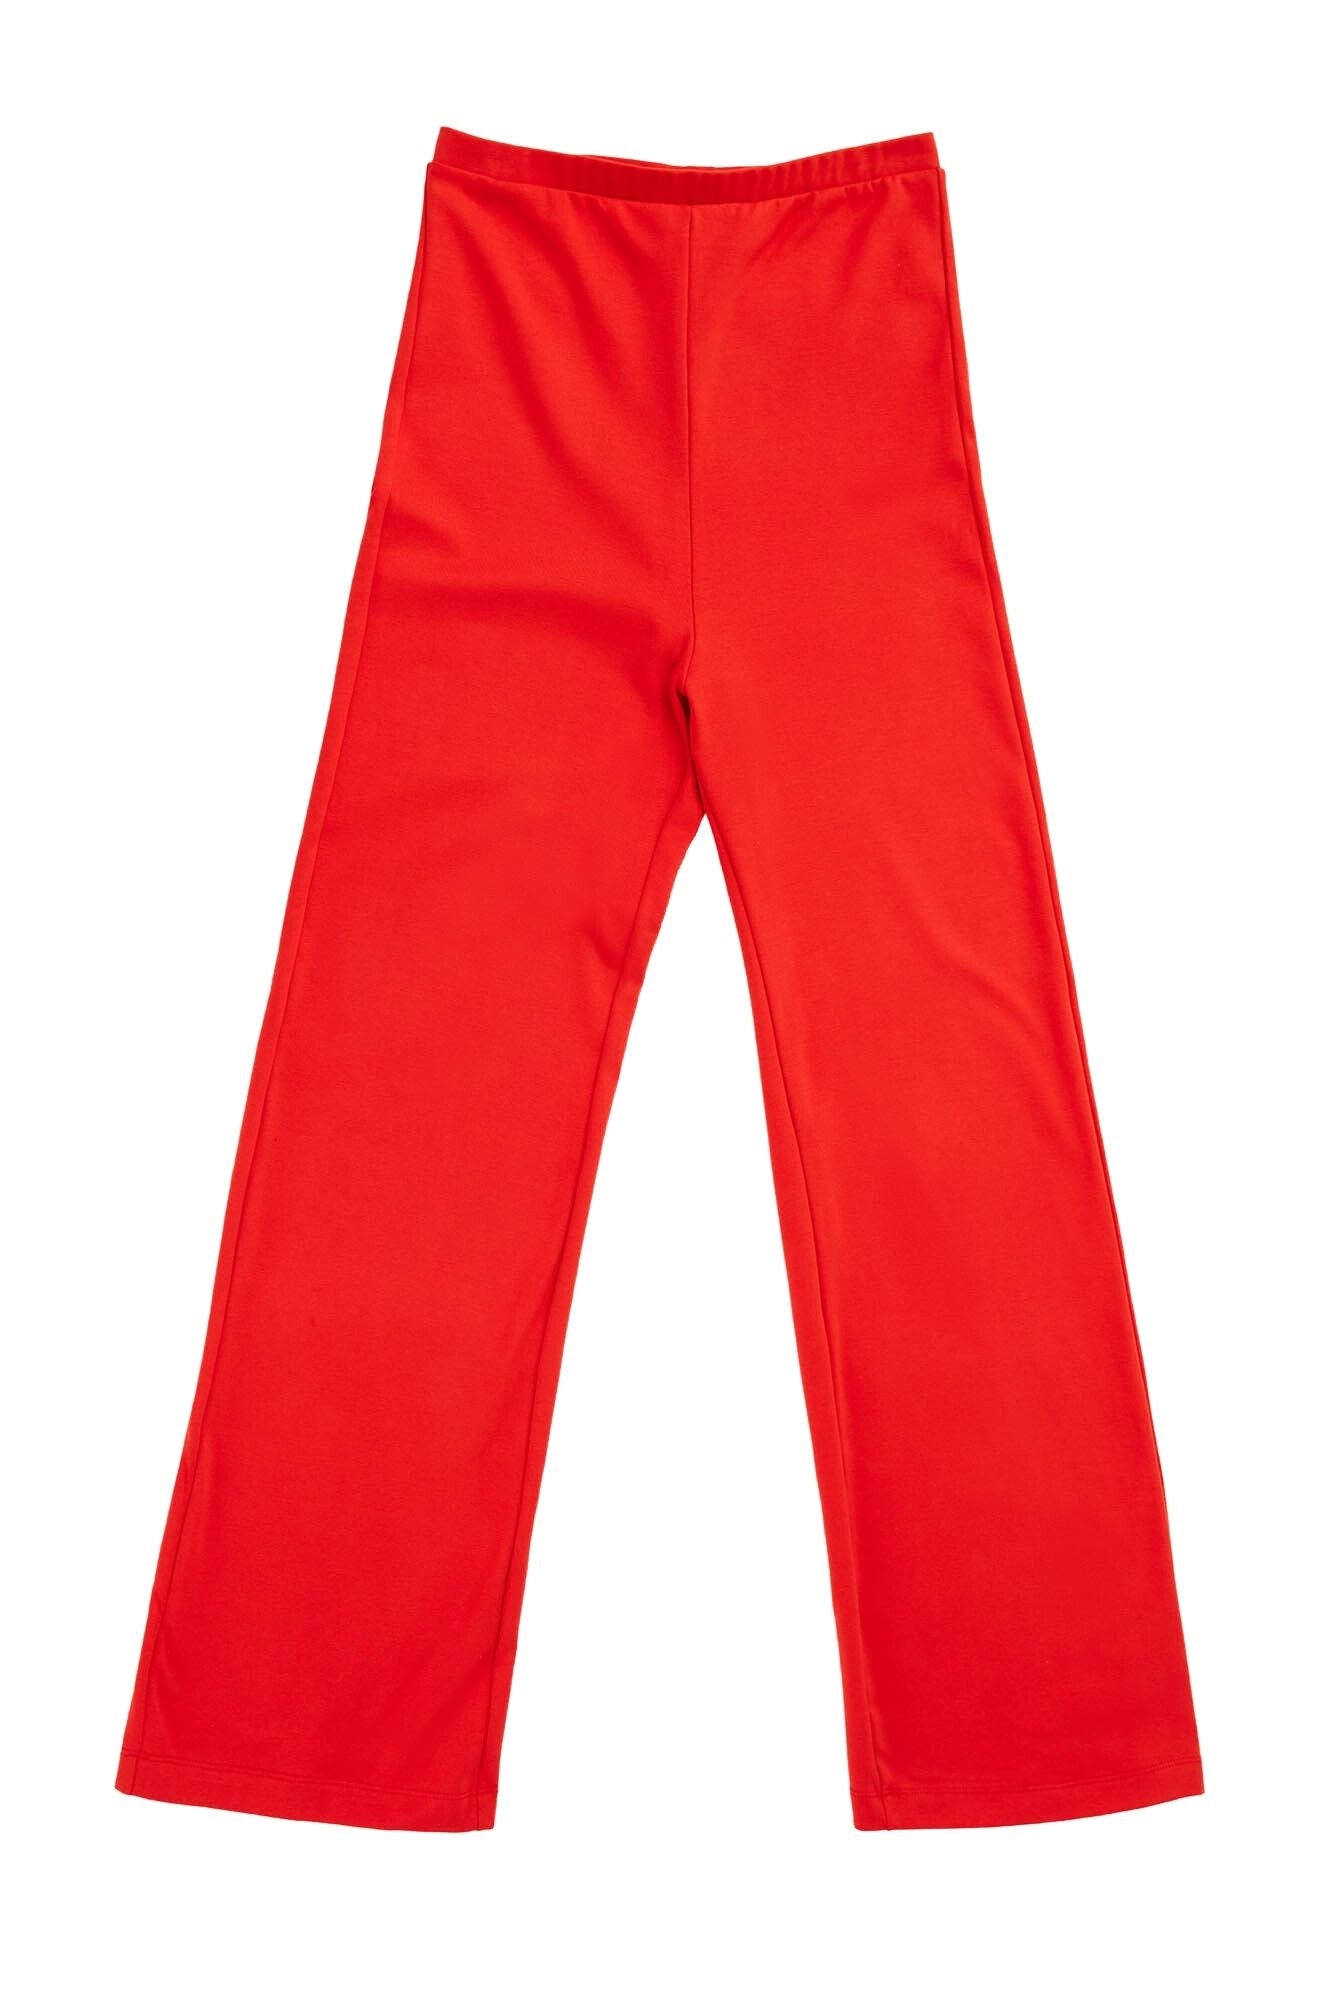 Zahra Over Belly Maternity Pants in the color Sunset Orange